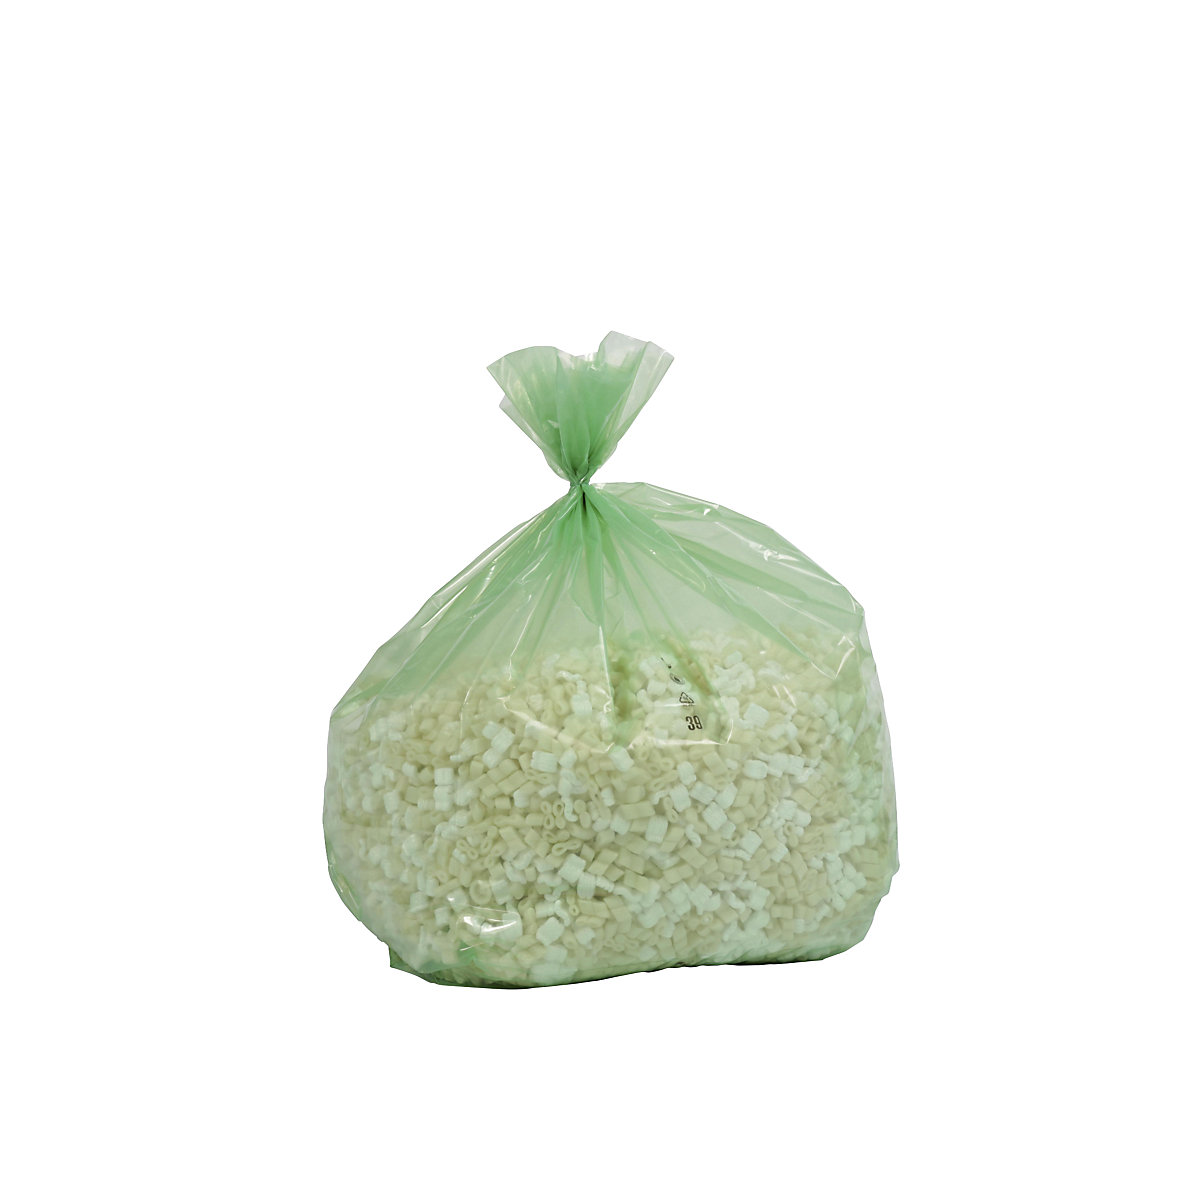 PREMIUM large capacity waste sacks, LDPE, 240 l, LxWxH 650 x 550 x 1350 mm, 80 µm, green-transparent, pack of 100-2